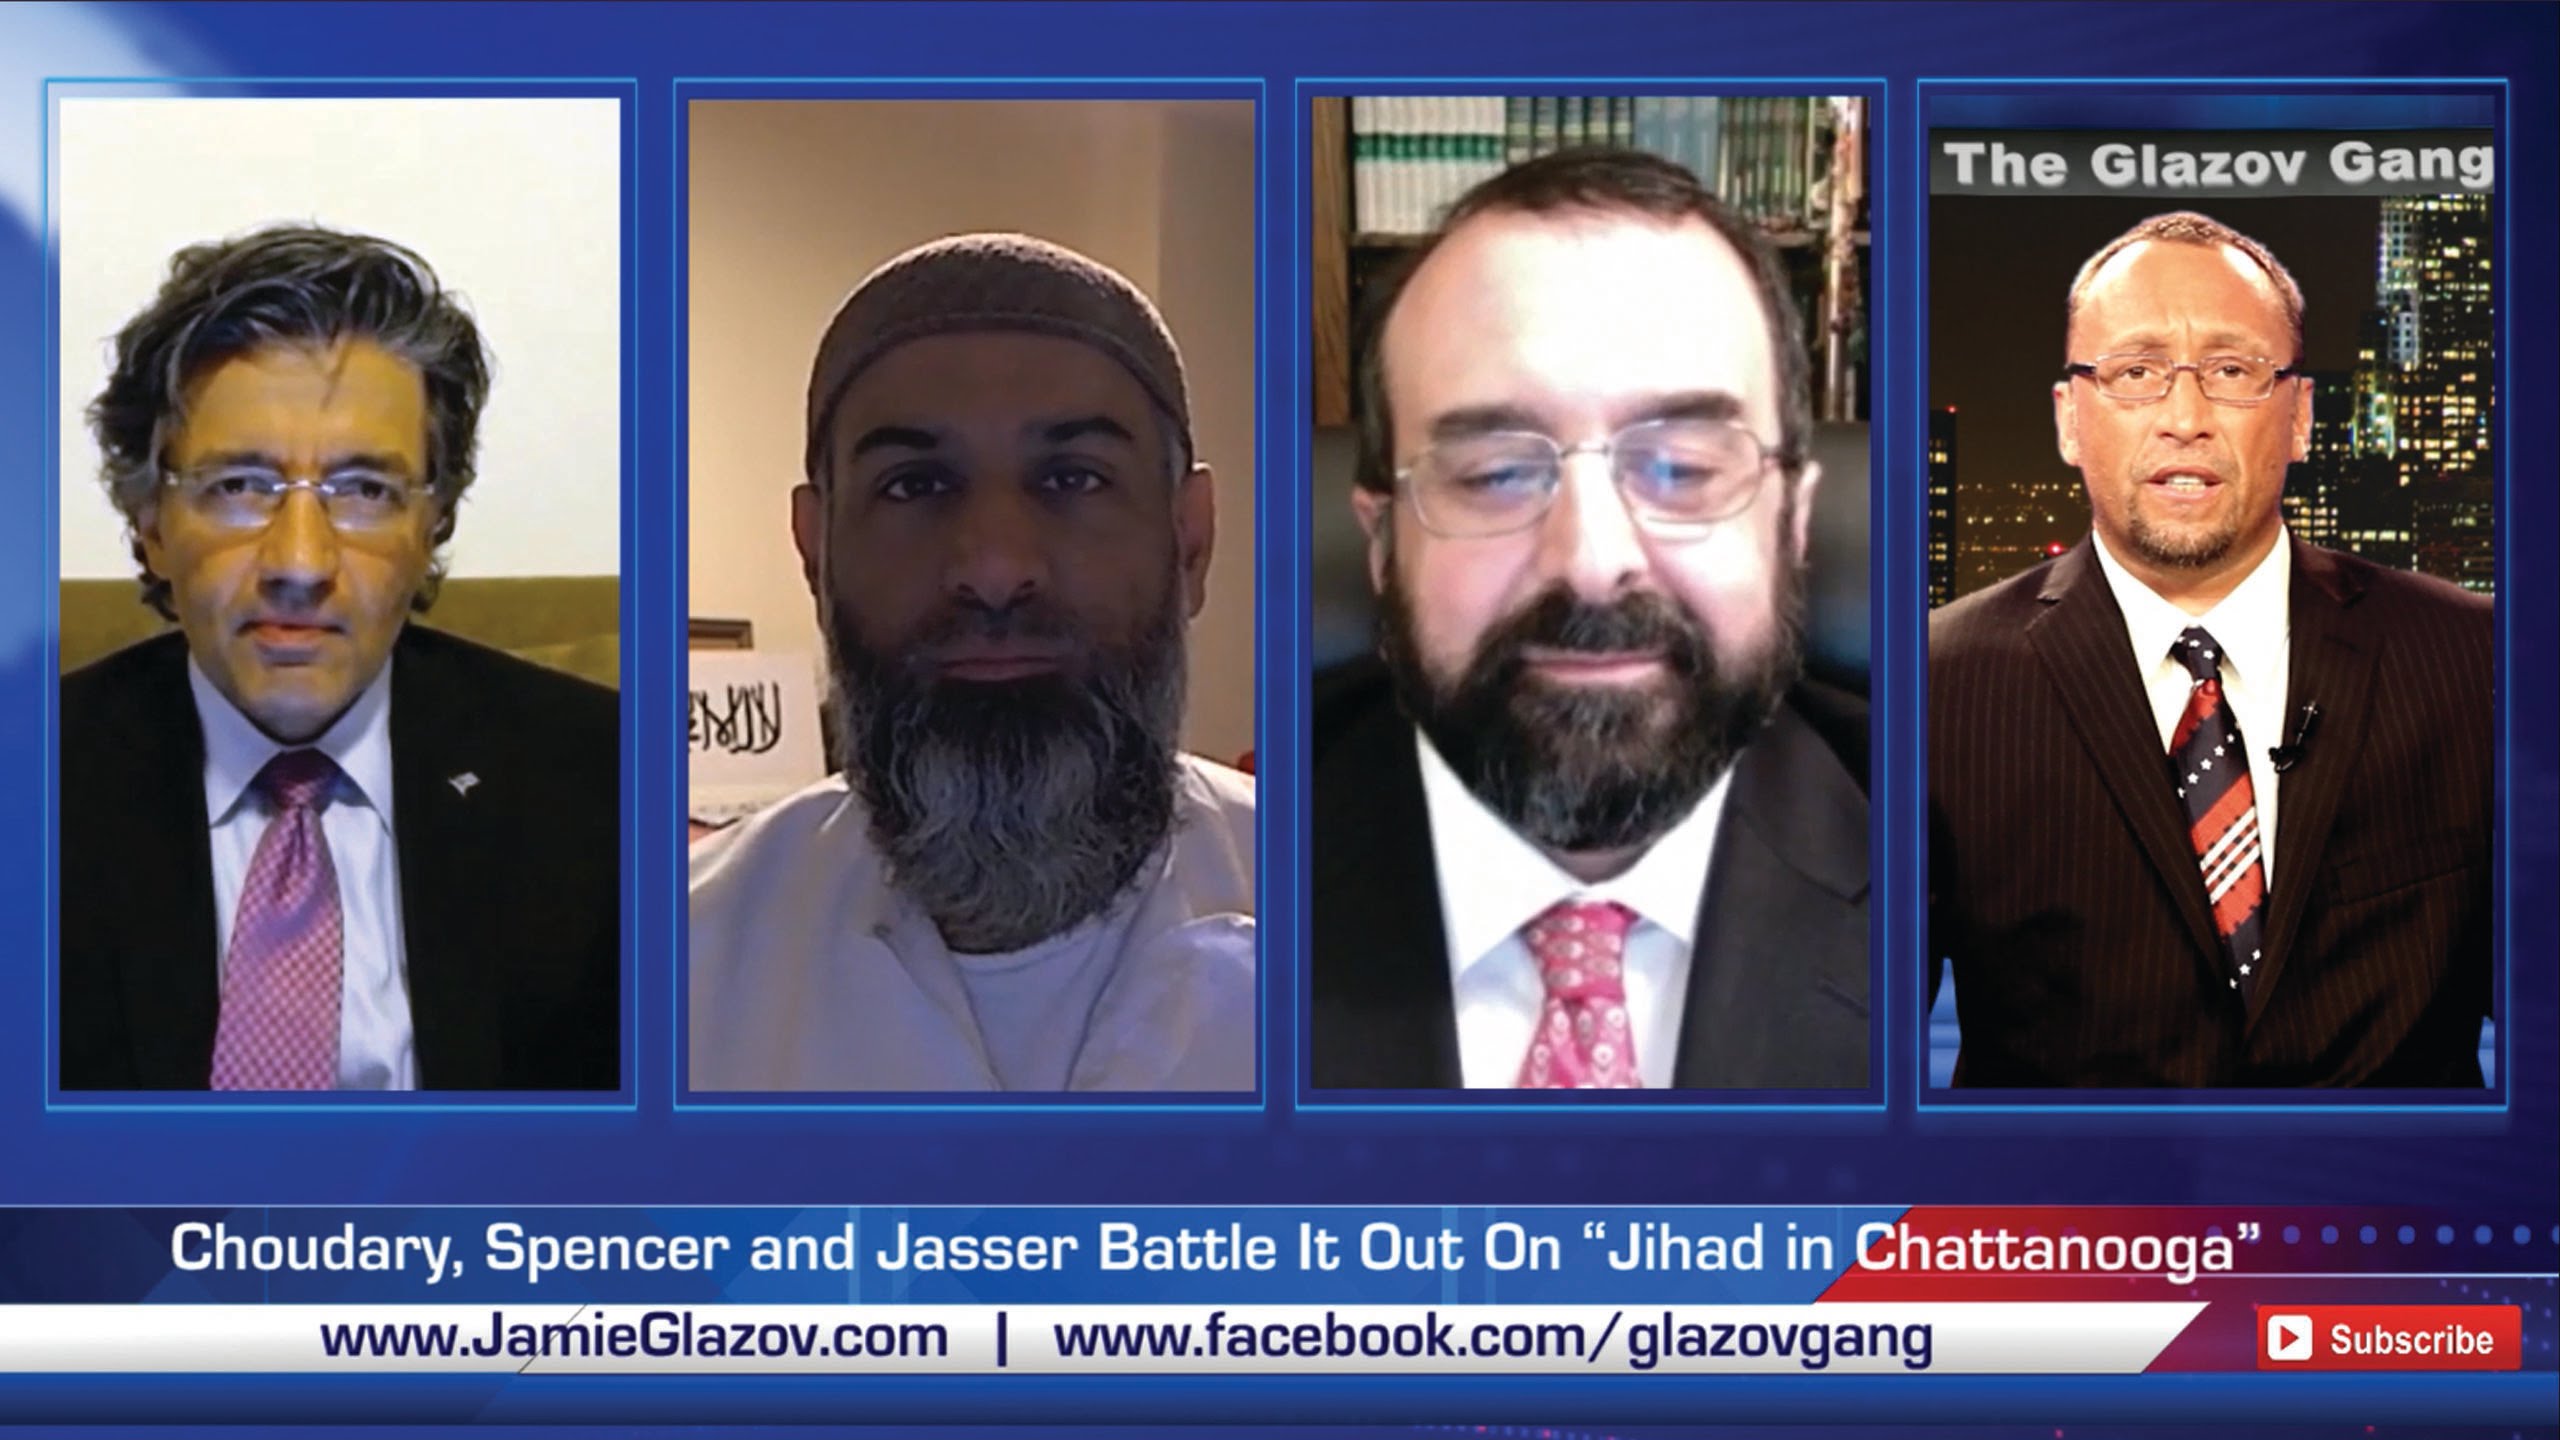 Choudary, Spencer and Jasser Battle It Out On “Jihad in Chattanooga”